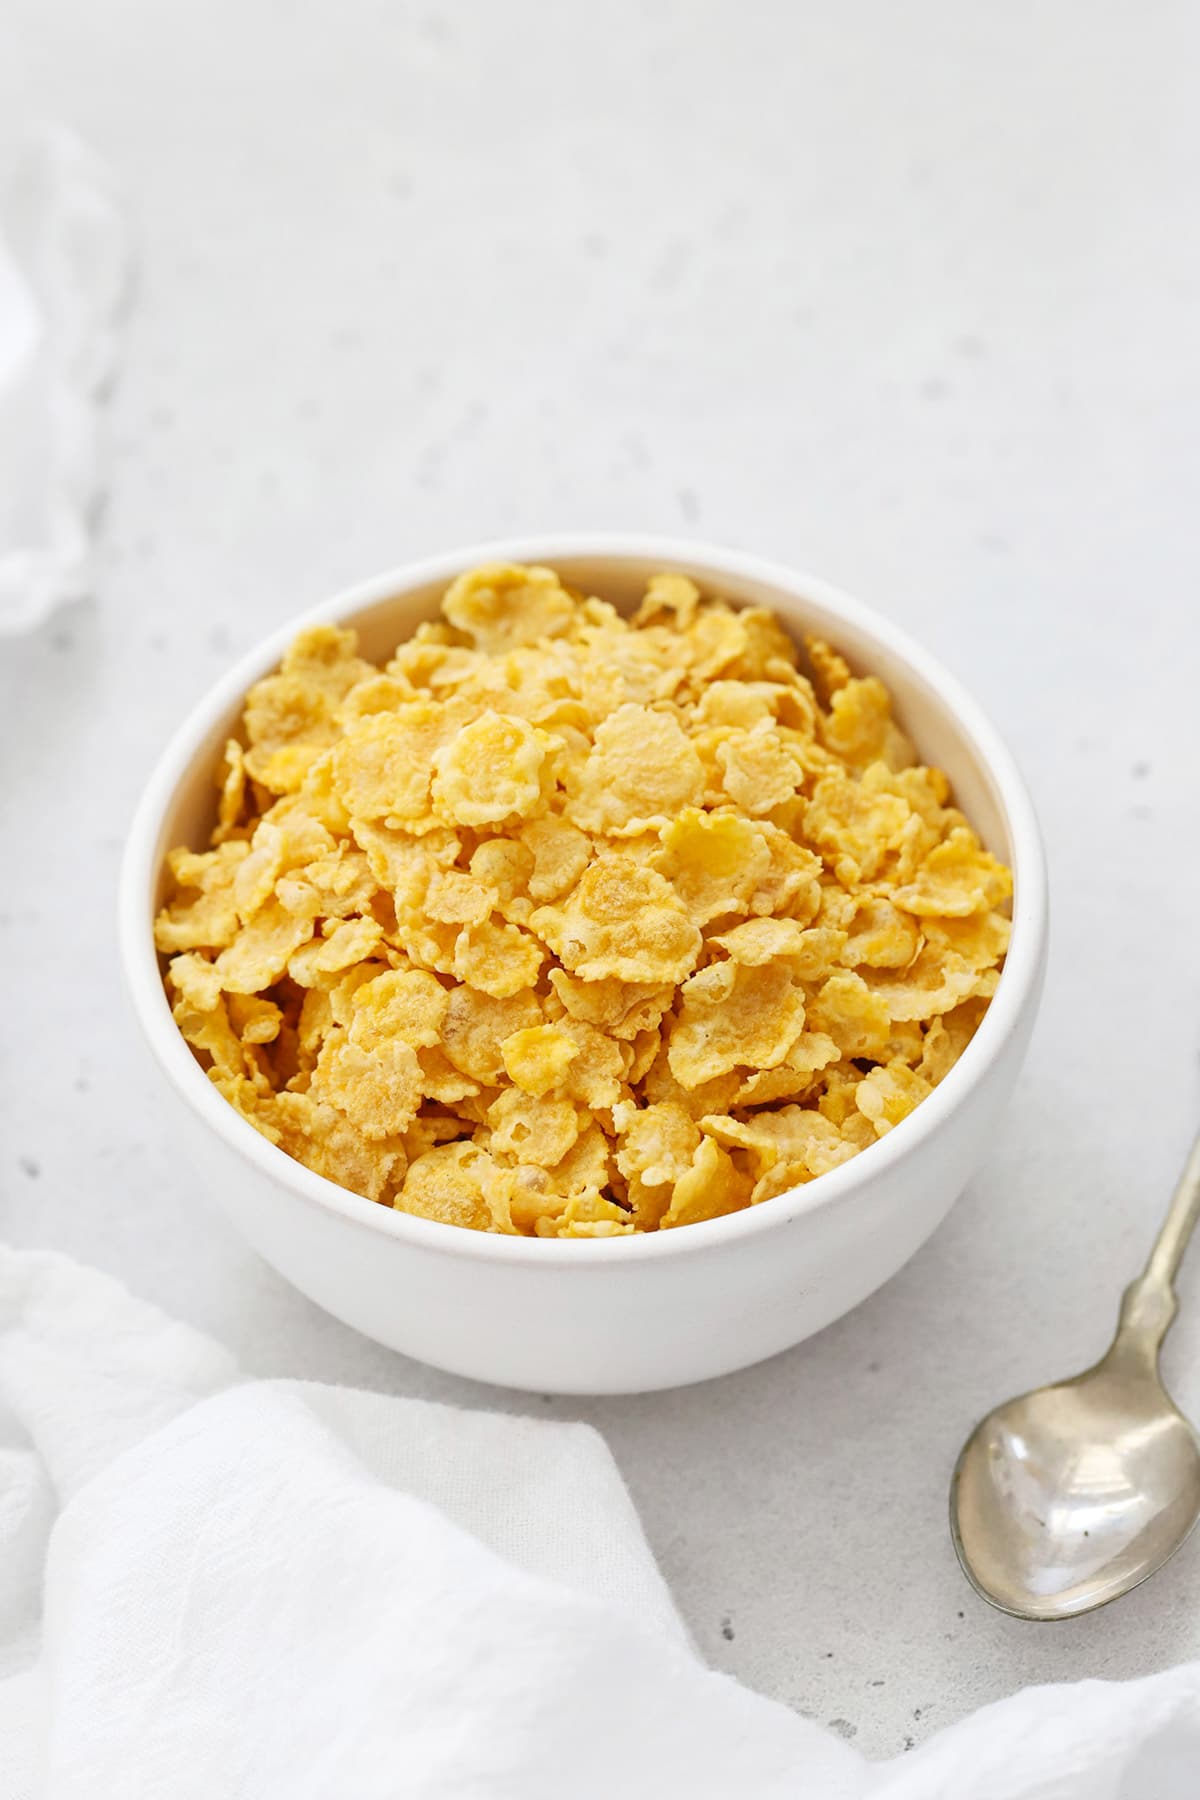 Overhead view of a white bowl of gluten free corn flakes